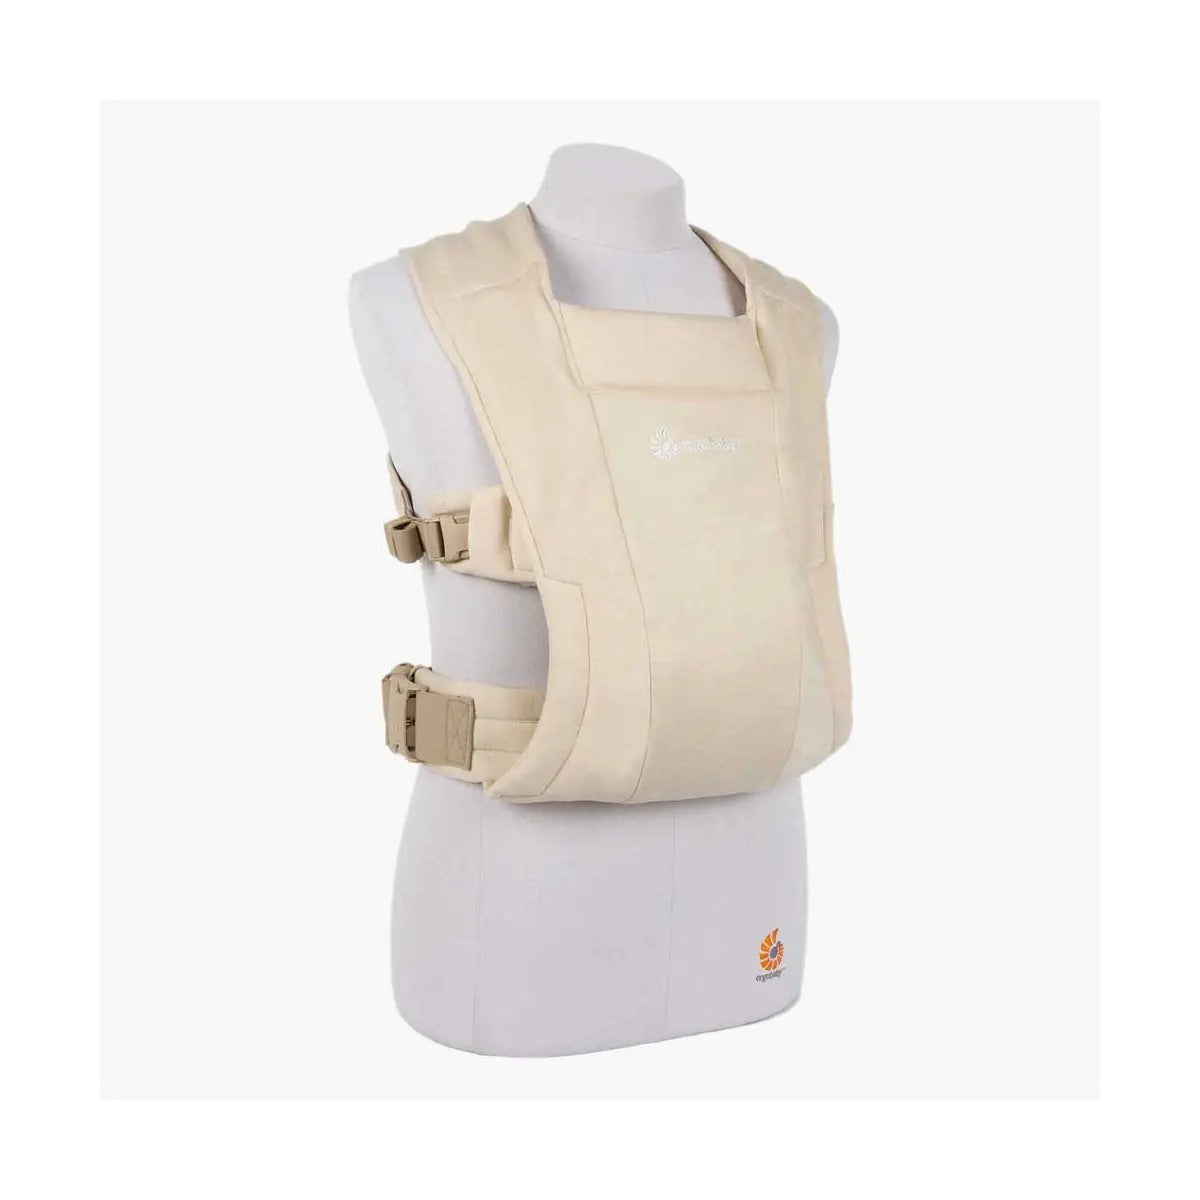 Ergobaby Carrier Adapt Embrace Soft Air Mesh - Cream - For Your Little One